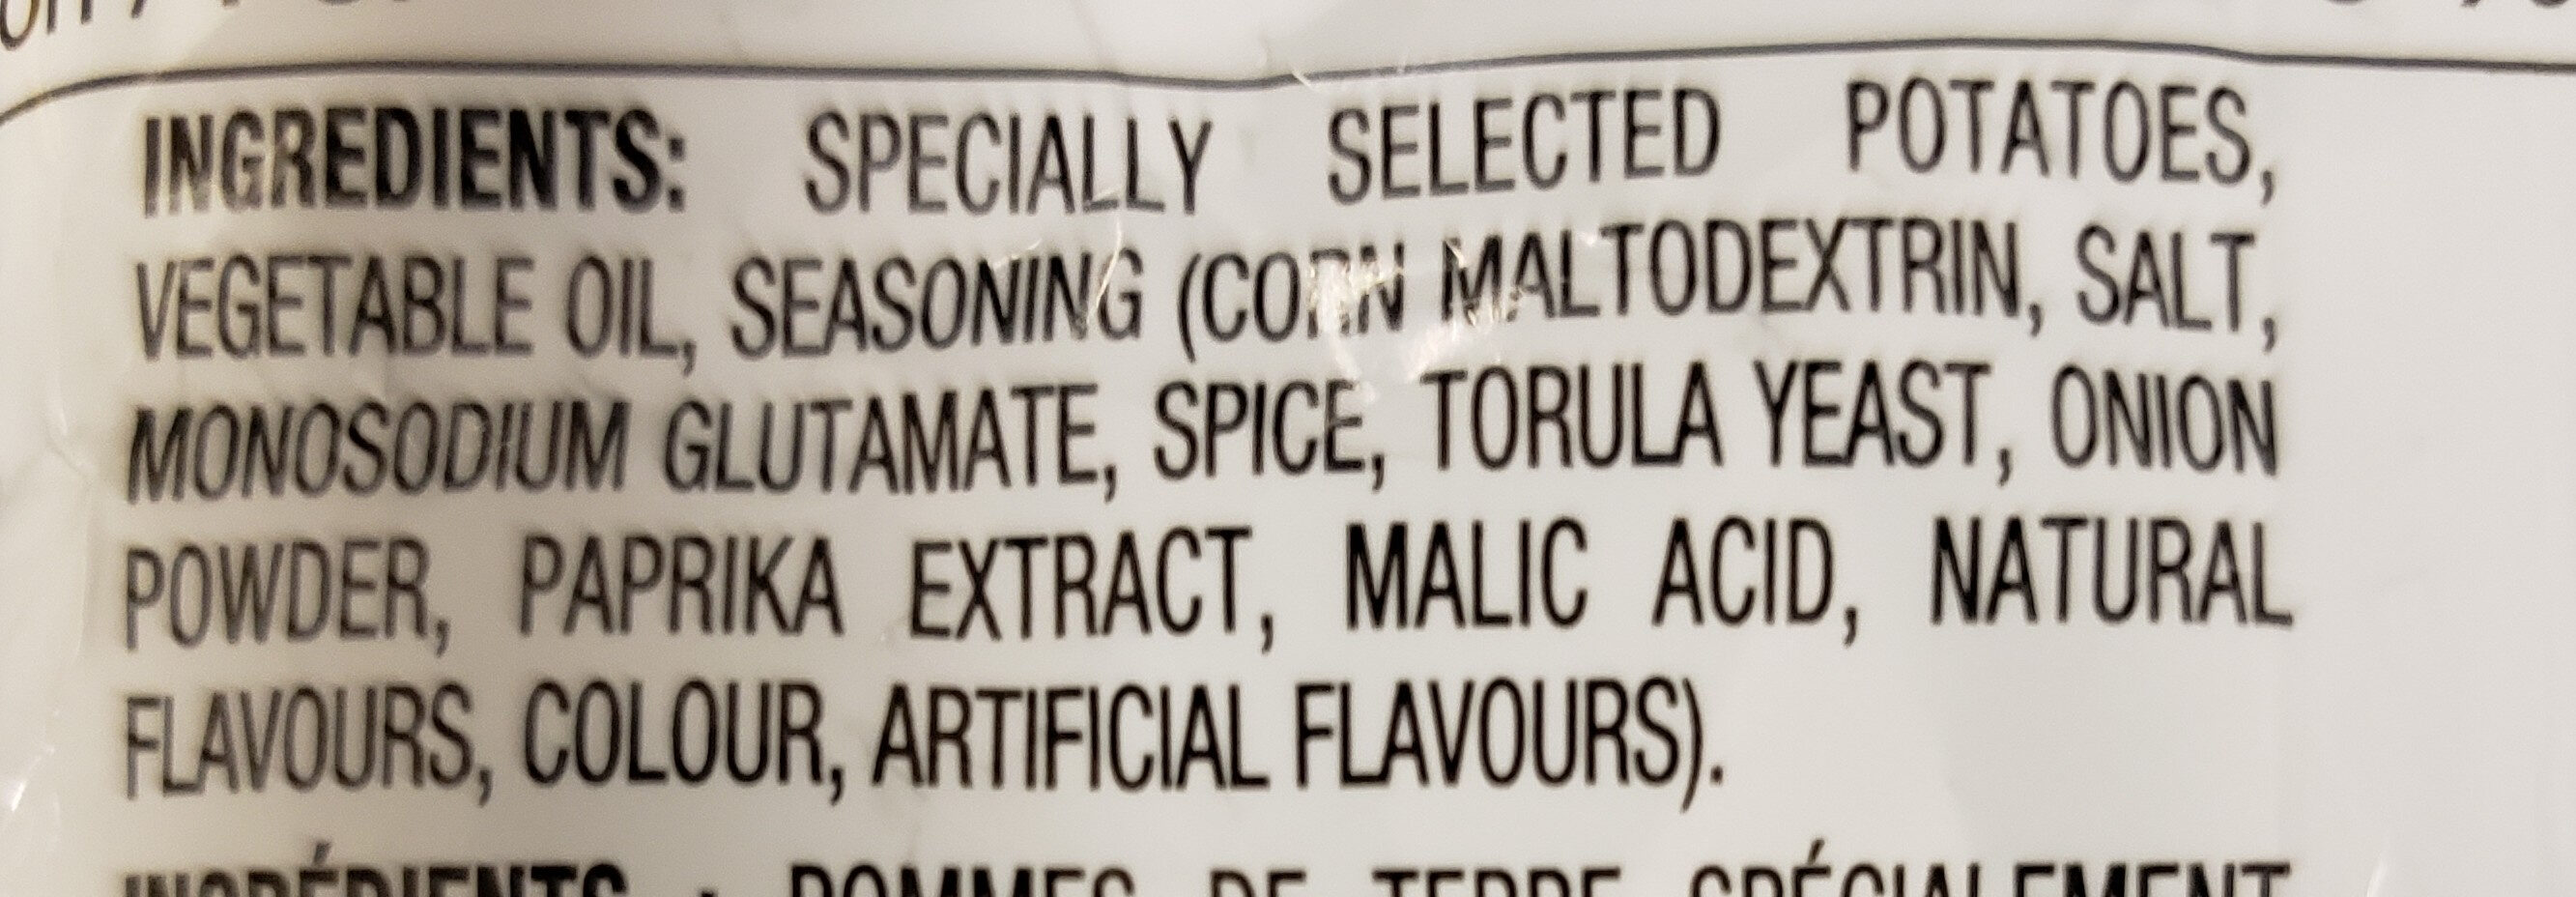 Hickory stick - Ingredients